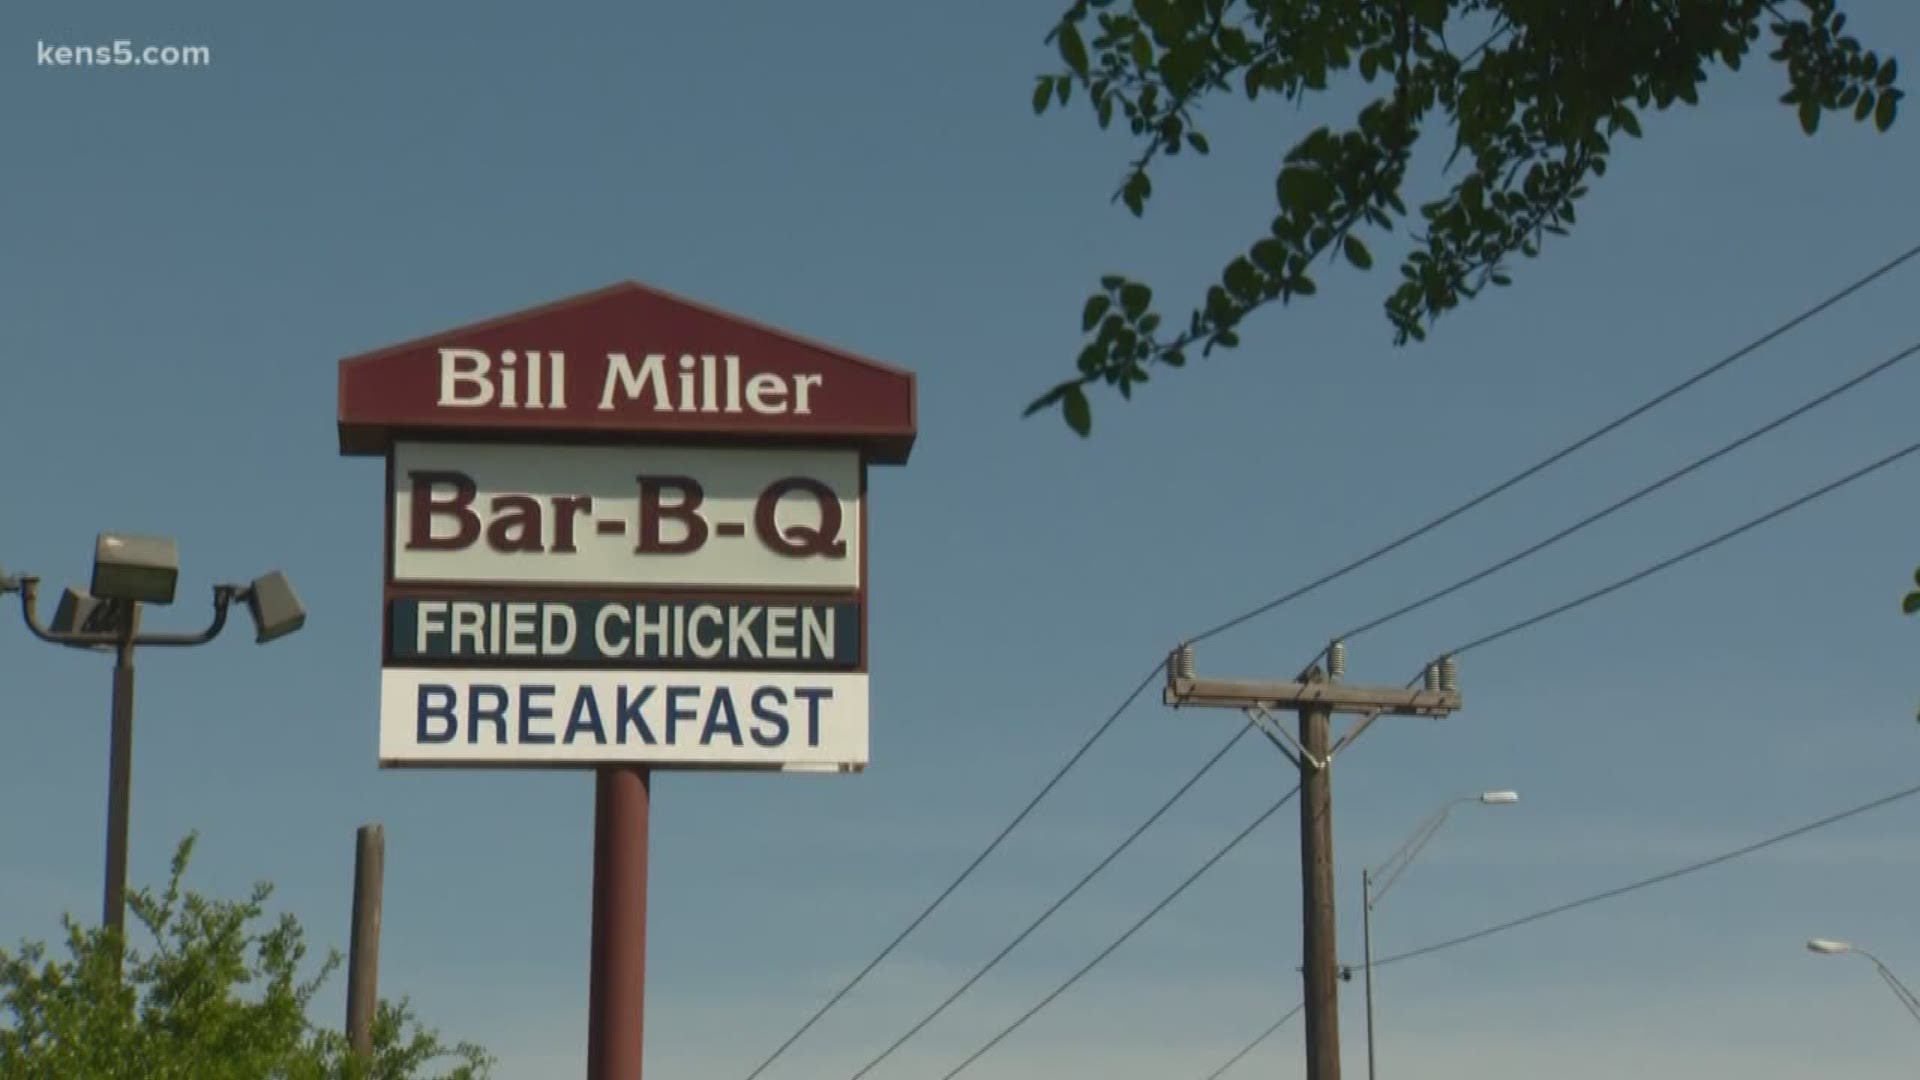 Bill Miller's BBQ has increasing wages for its workers, and hasn't laid off any amid the stay-home order in San Antonio.